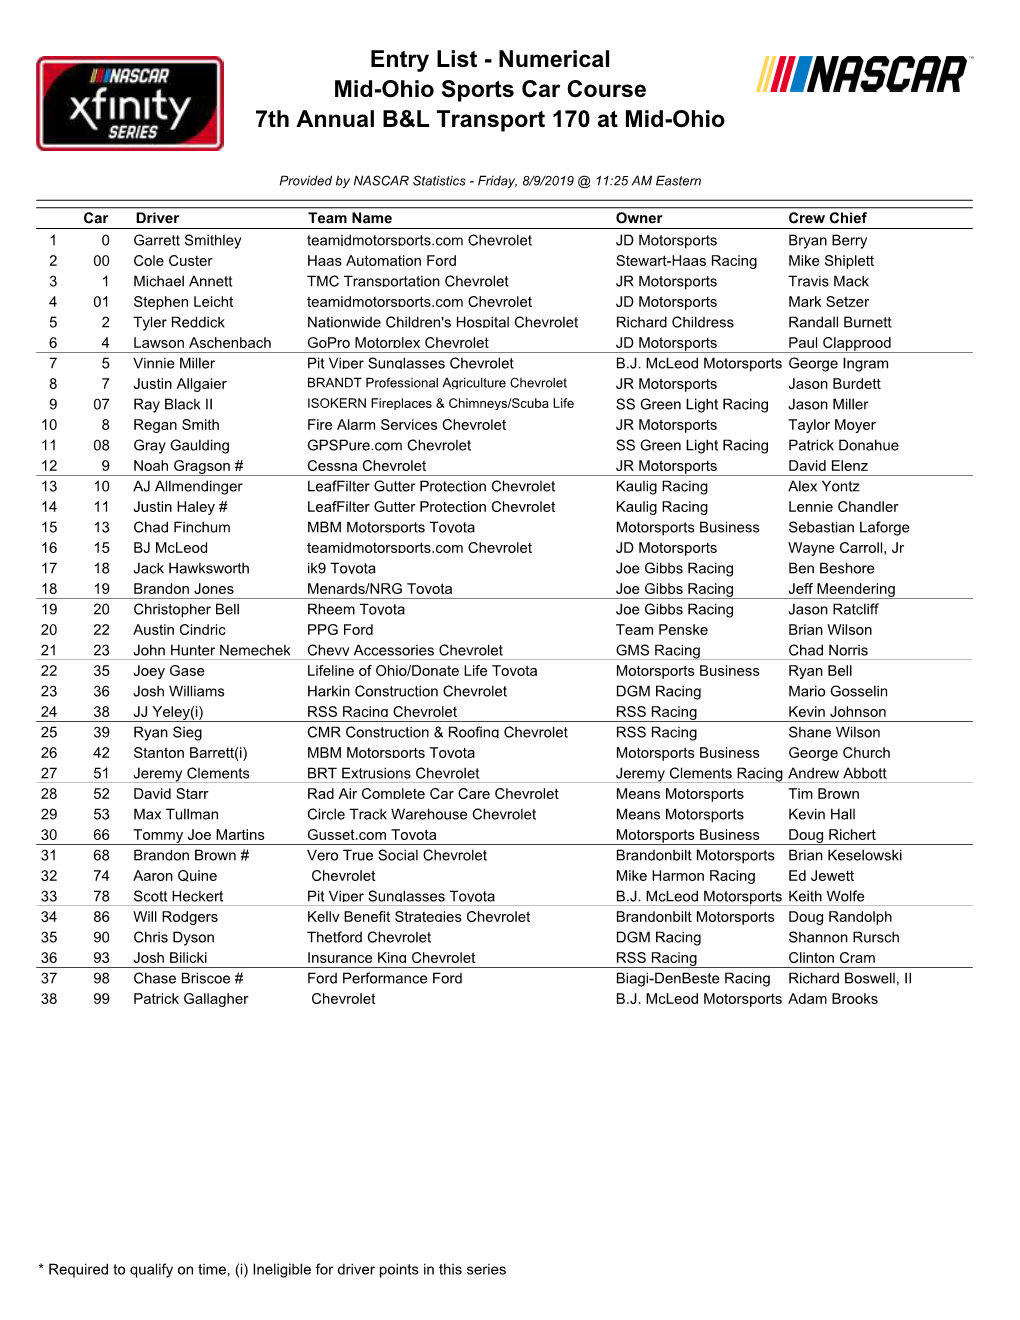 Entry List - Numerical Mid-Ohio Sports Car Course 7Th Annual B&L Transport 170 at Mid-Ohio